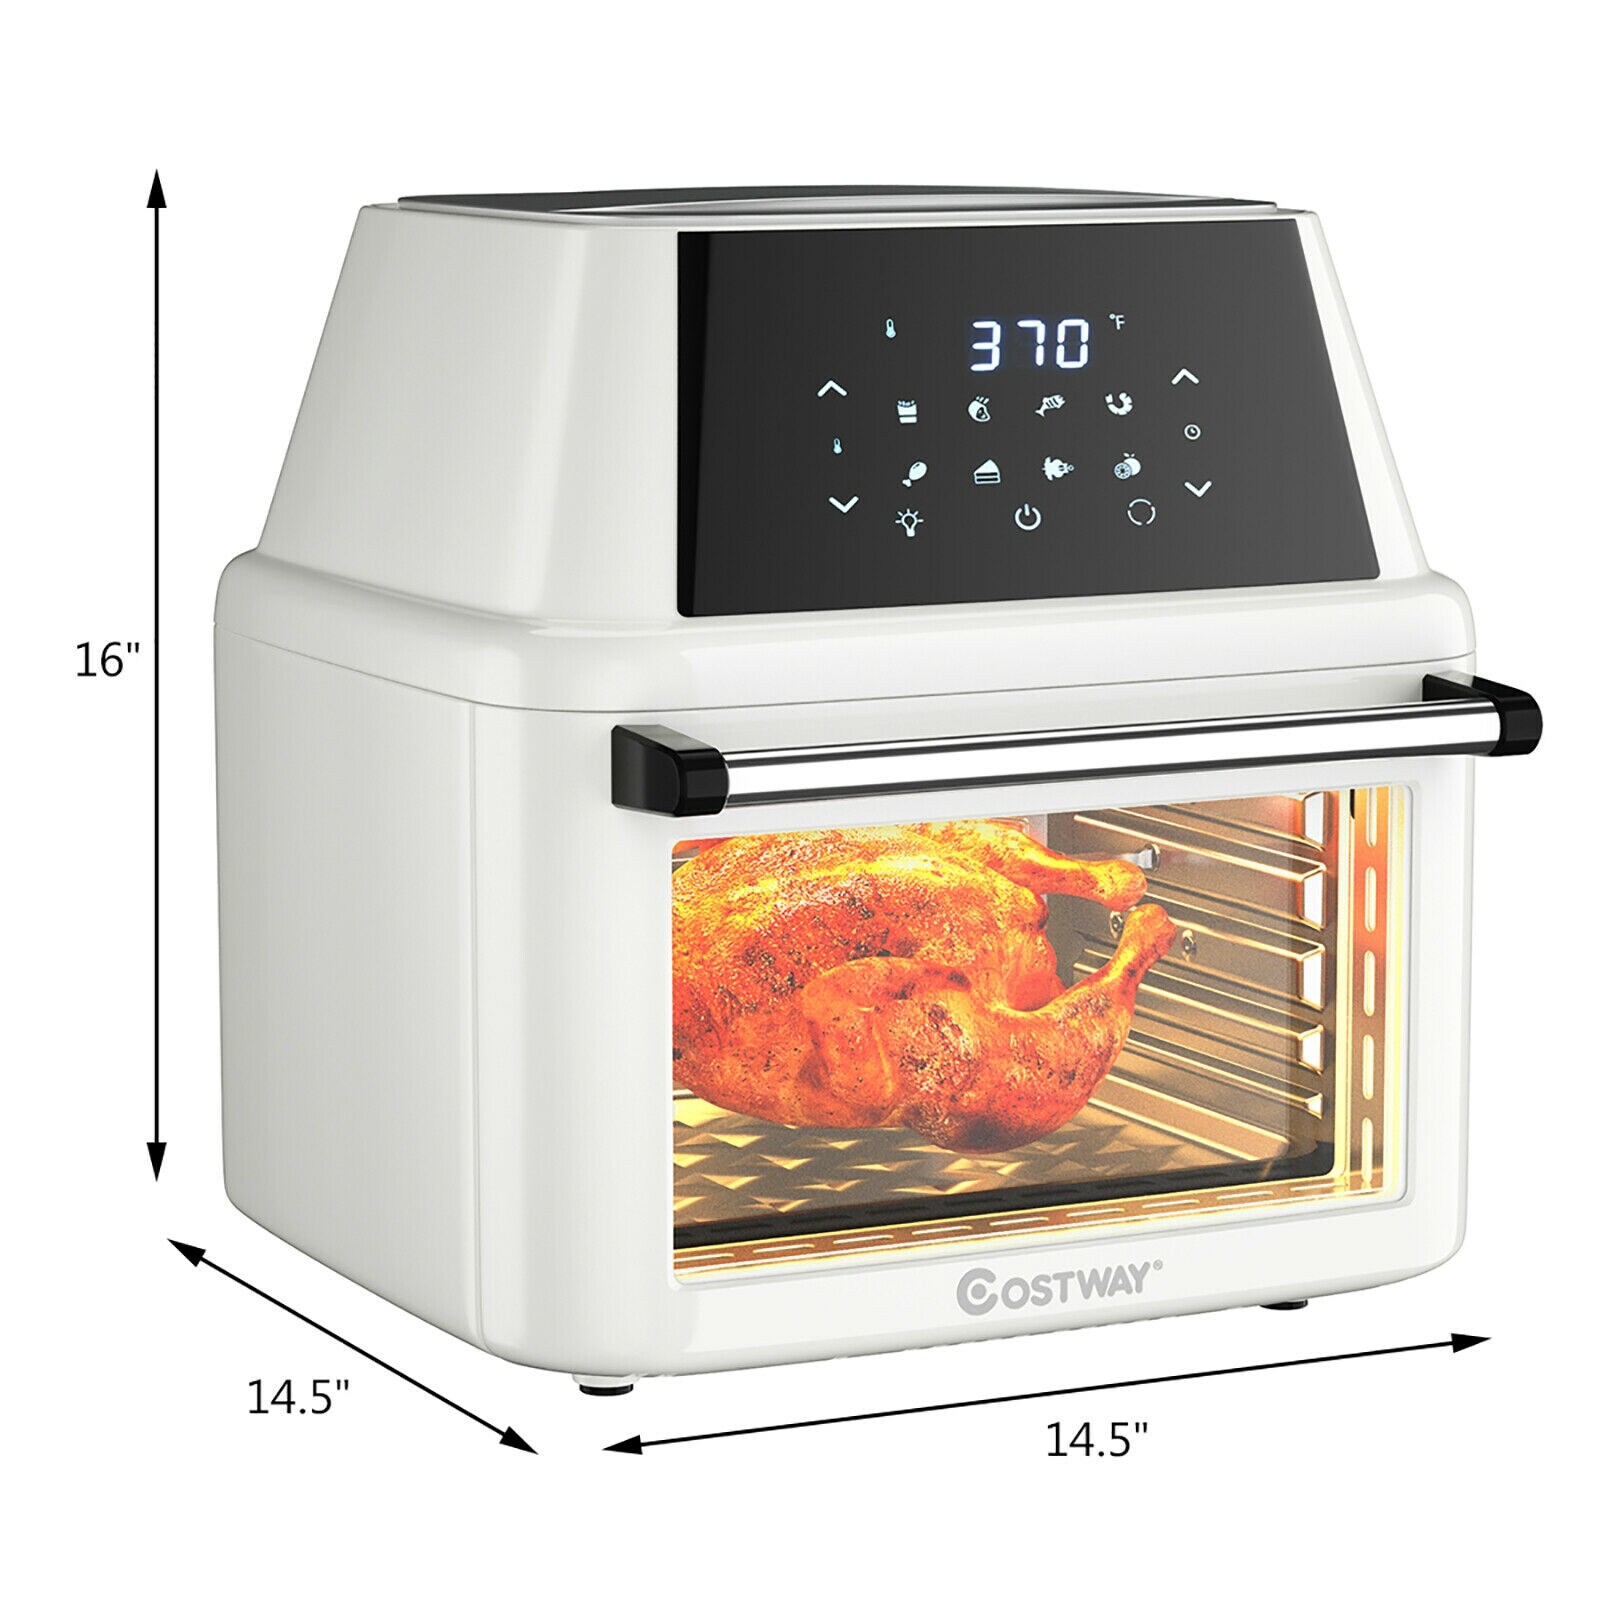 Costway 5.3 QT. Black Electric Hot Air Fryer 1700W Stainless steel